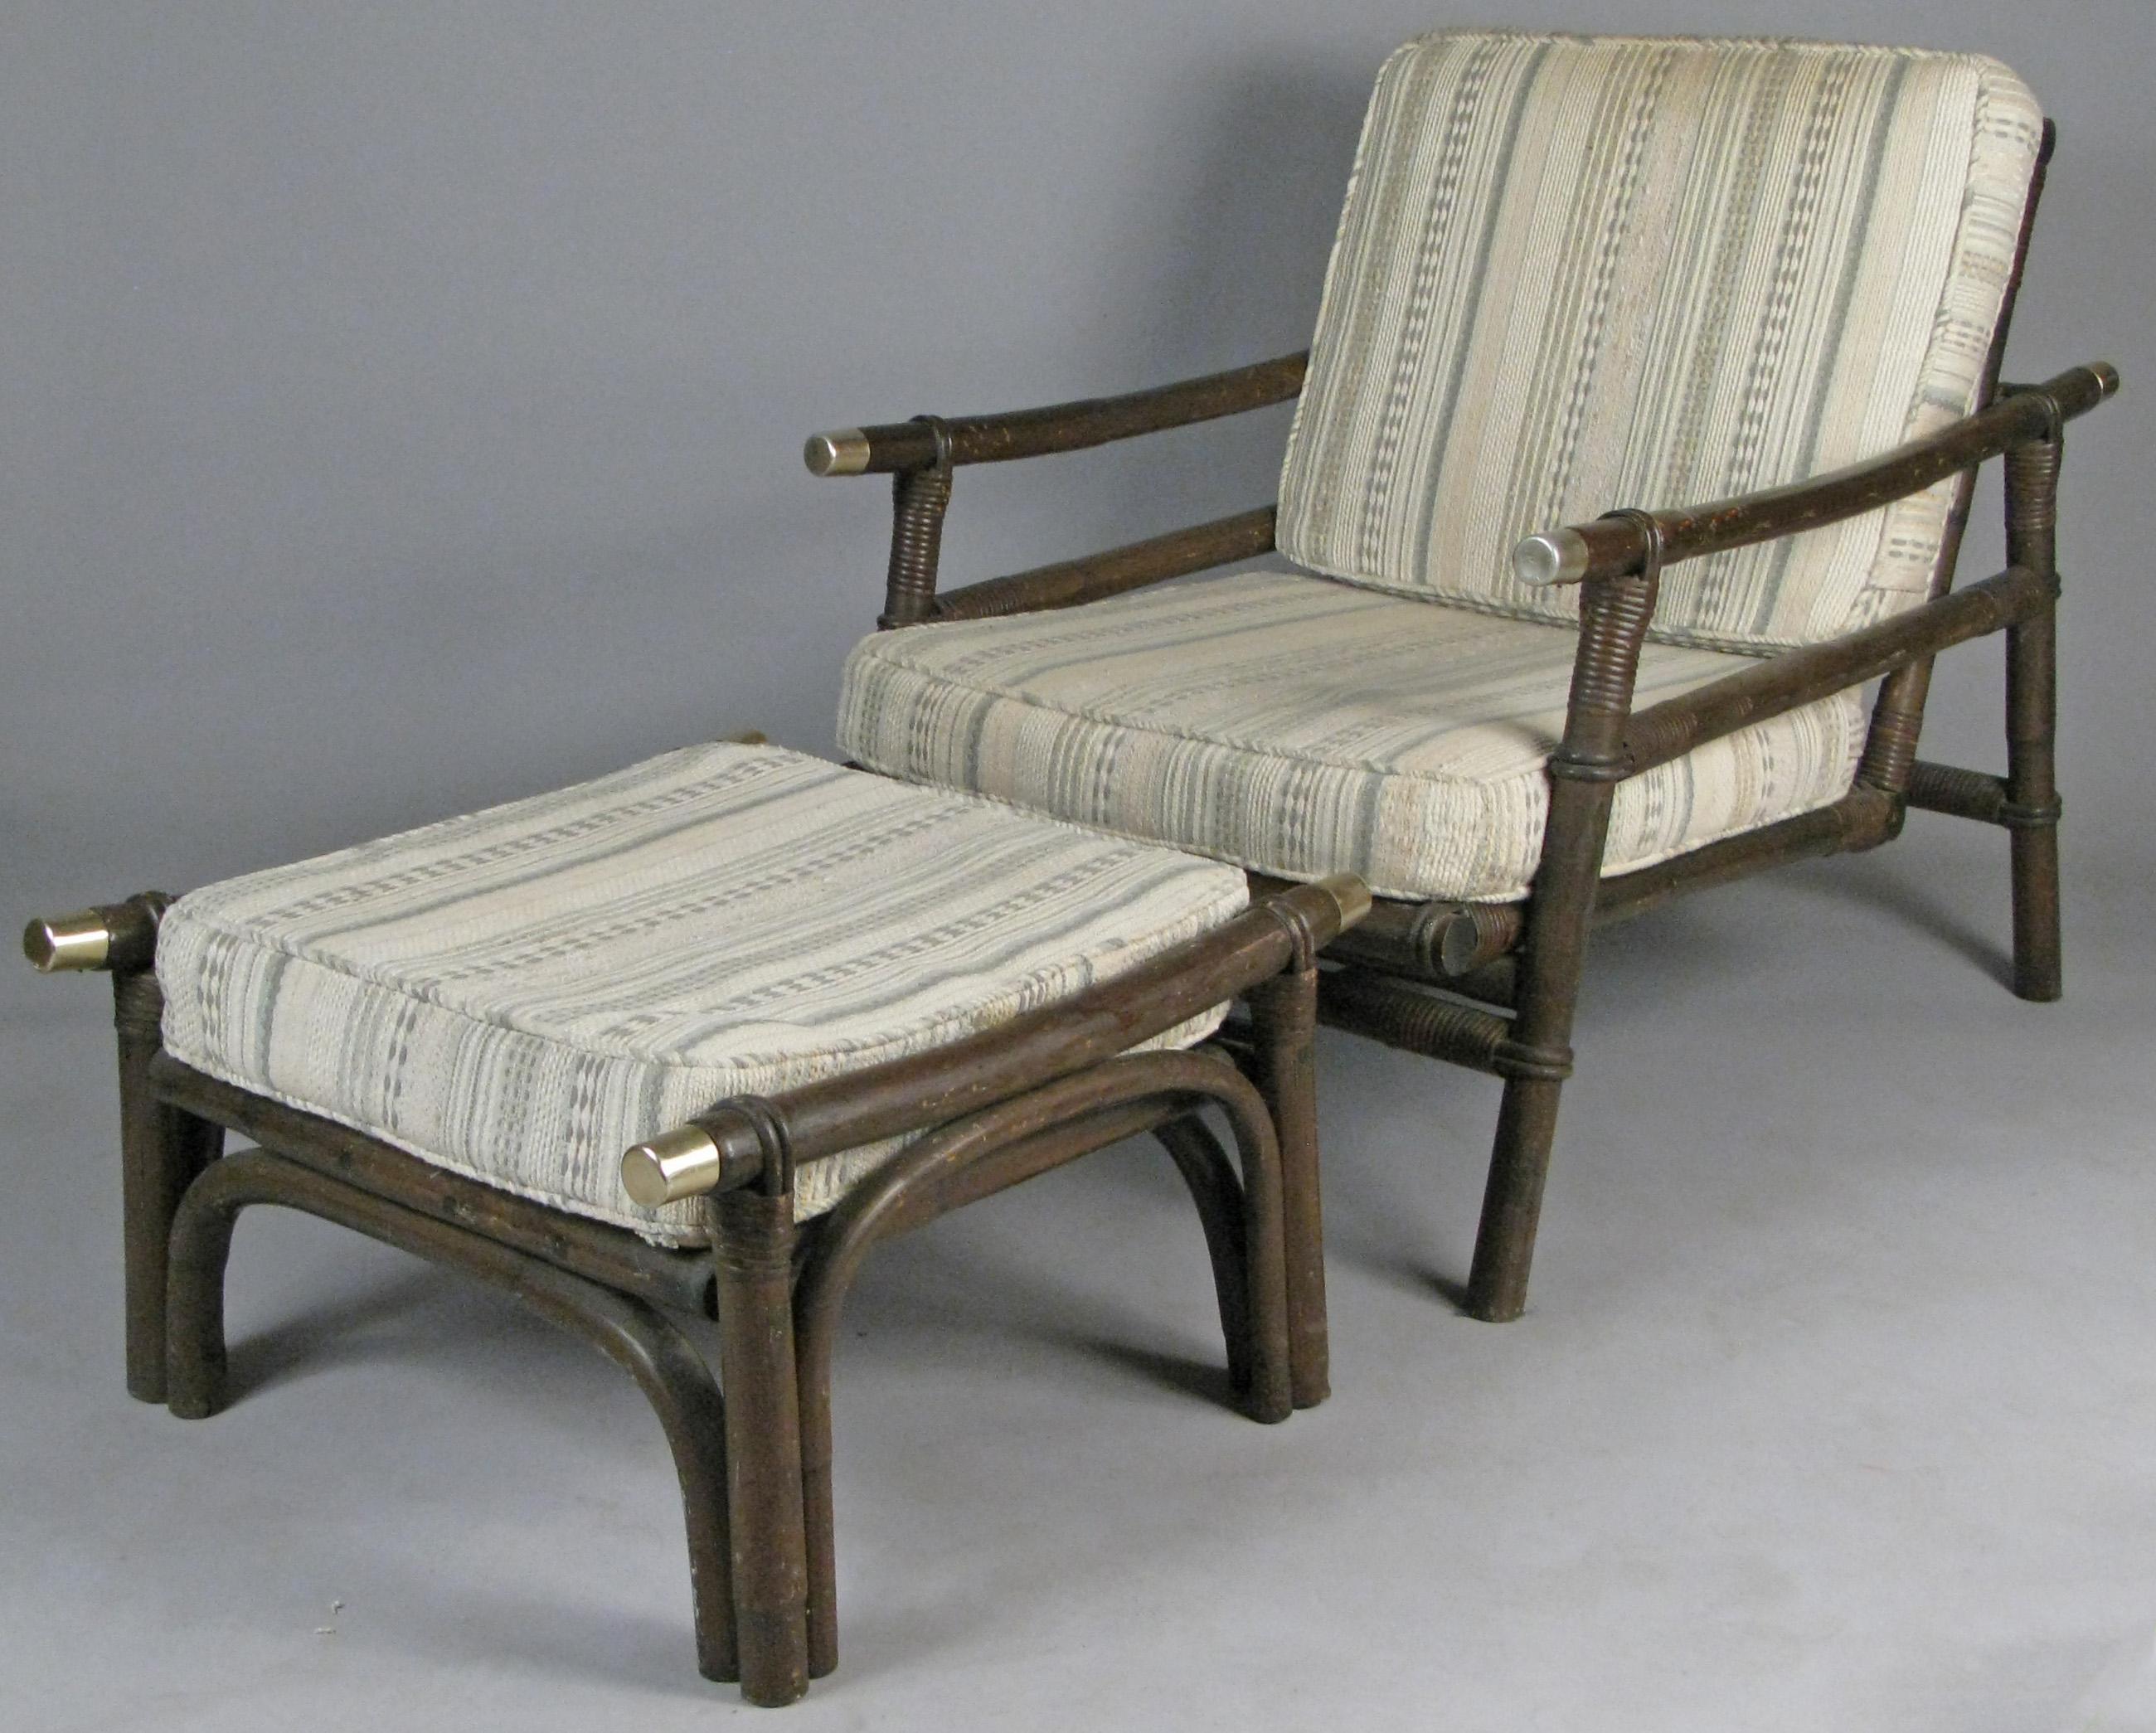 A very nice matched pair of vintage 1950s rattan frame lounge chairs and matching ottomans in the style of John Wisner for Ficks Reed. With painted rattan frames and steel end caps. These have their original upholstered cushions which are worn and